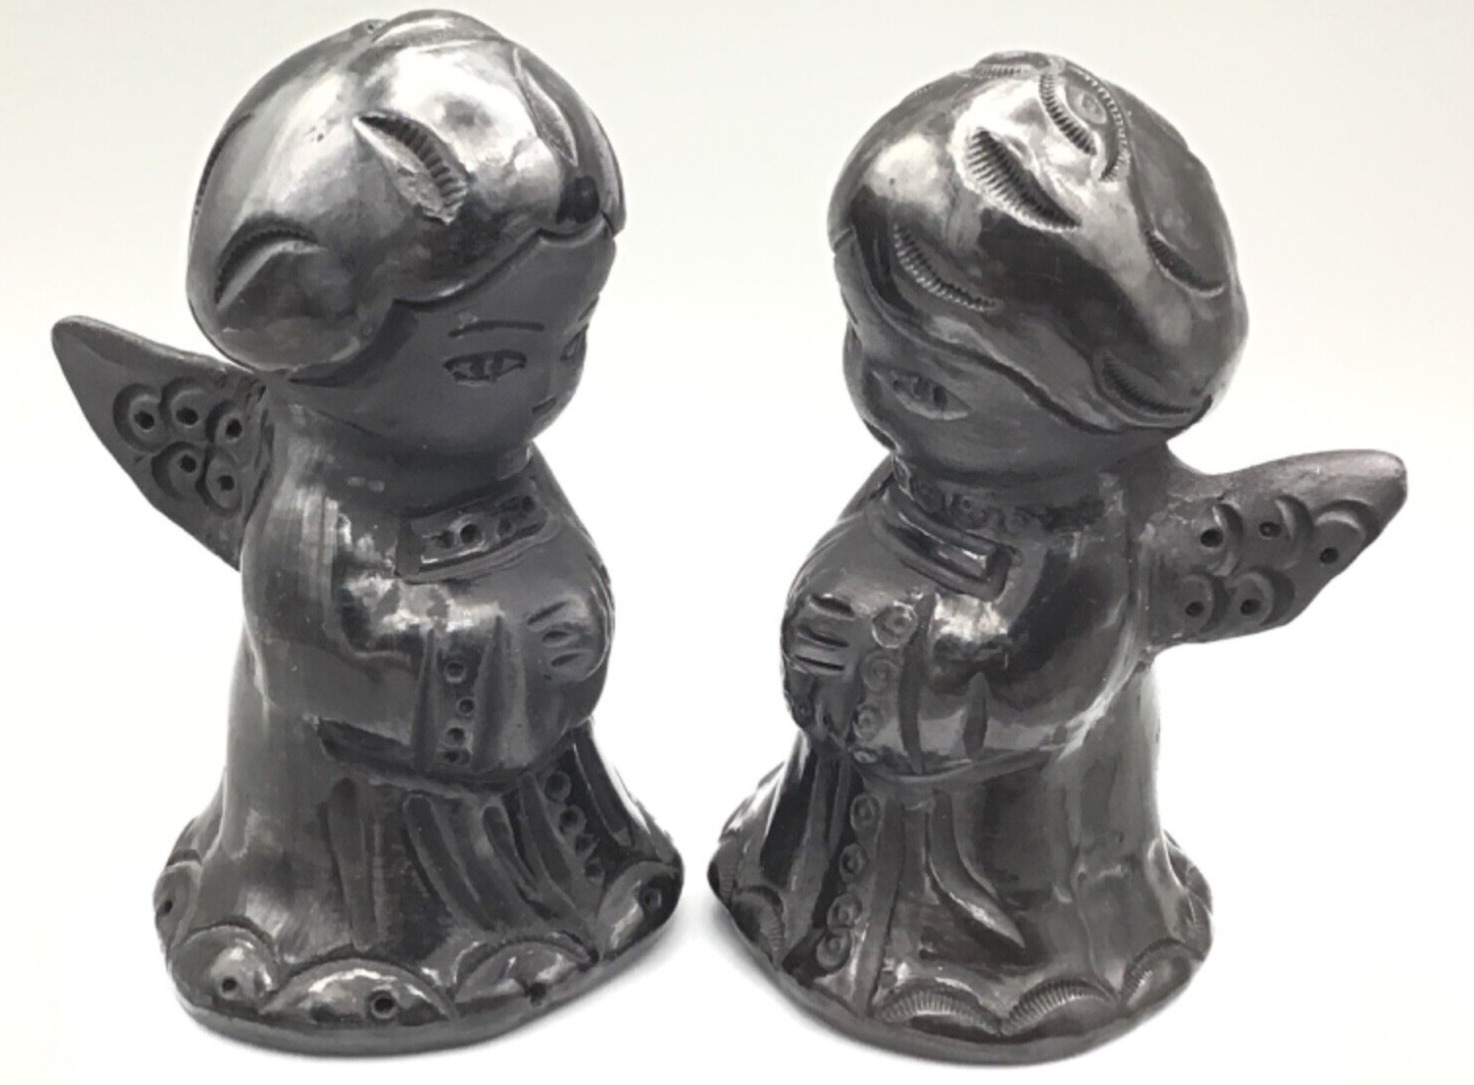 Vintage Set of 2 ANGELS Artisan Hand-crafted CLAY Figurine